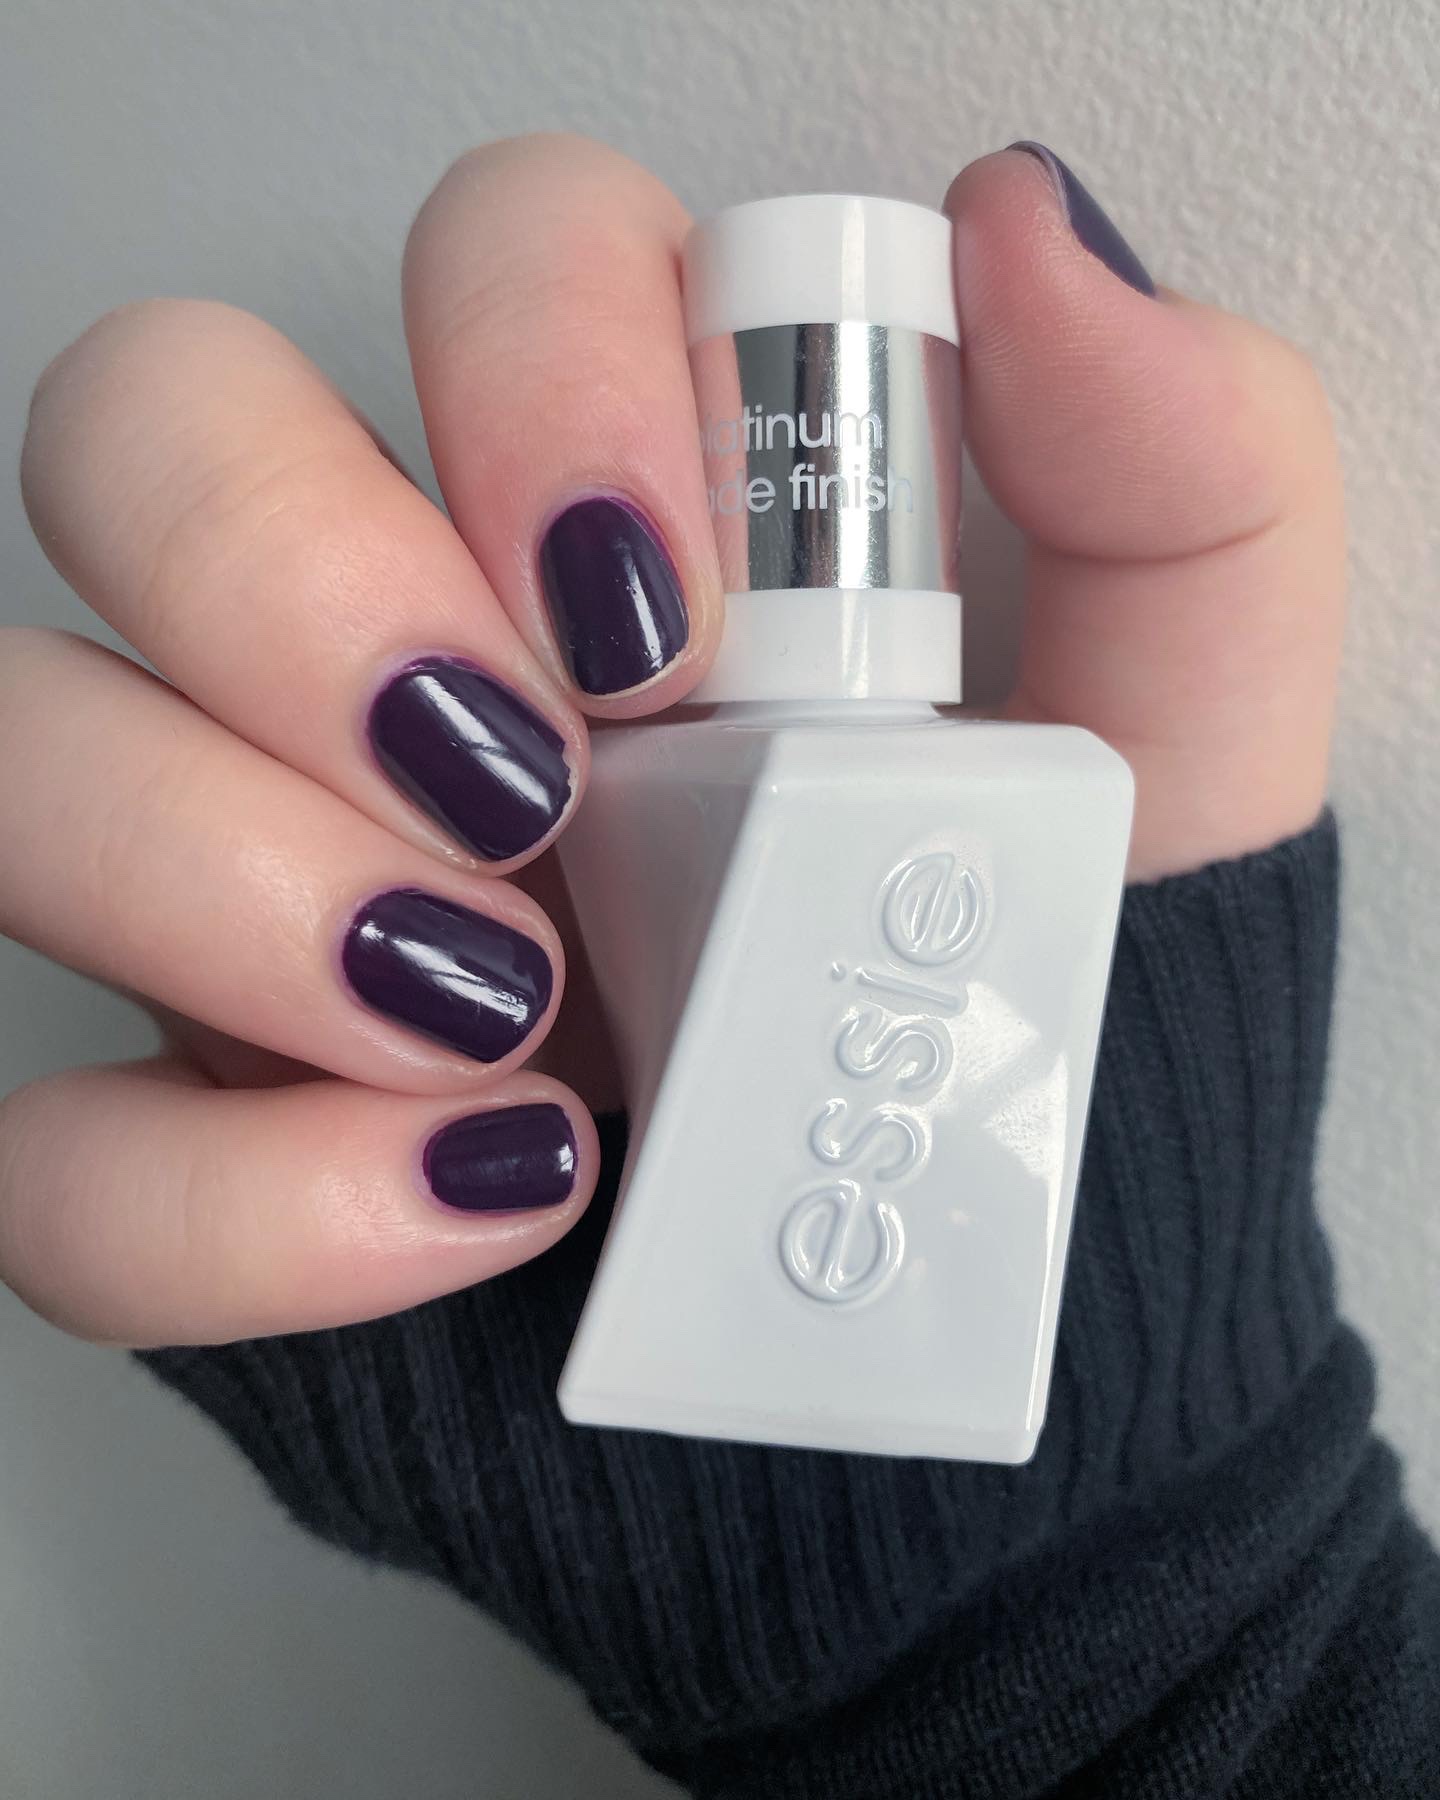 Essie Gel Couture Top Coat Review and Wear Test – The Polish Blog